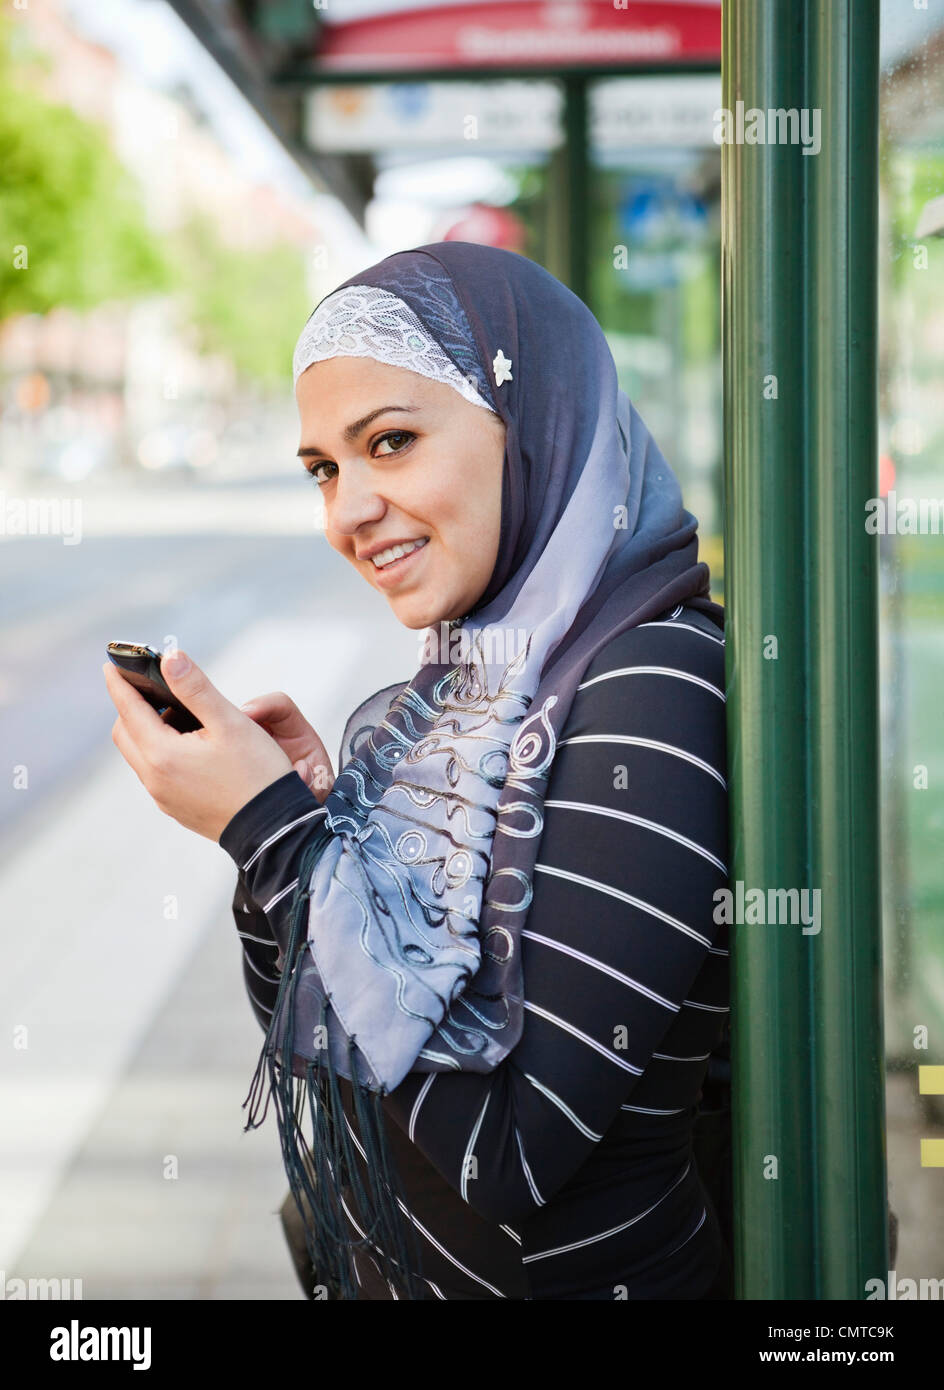 Smiling woman wearing headscarf waiting on bus Stock Photo